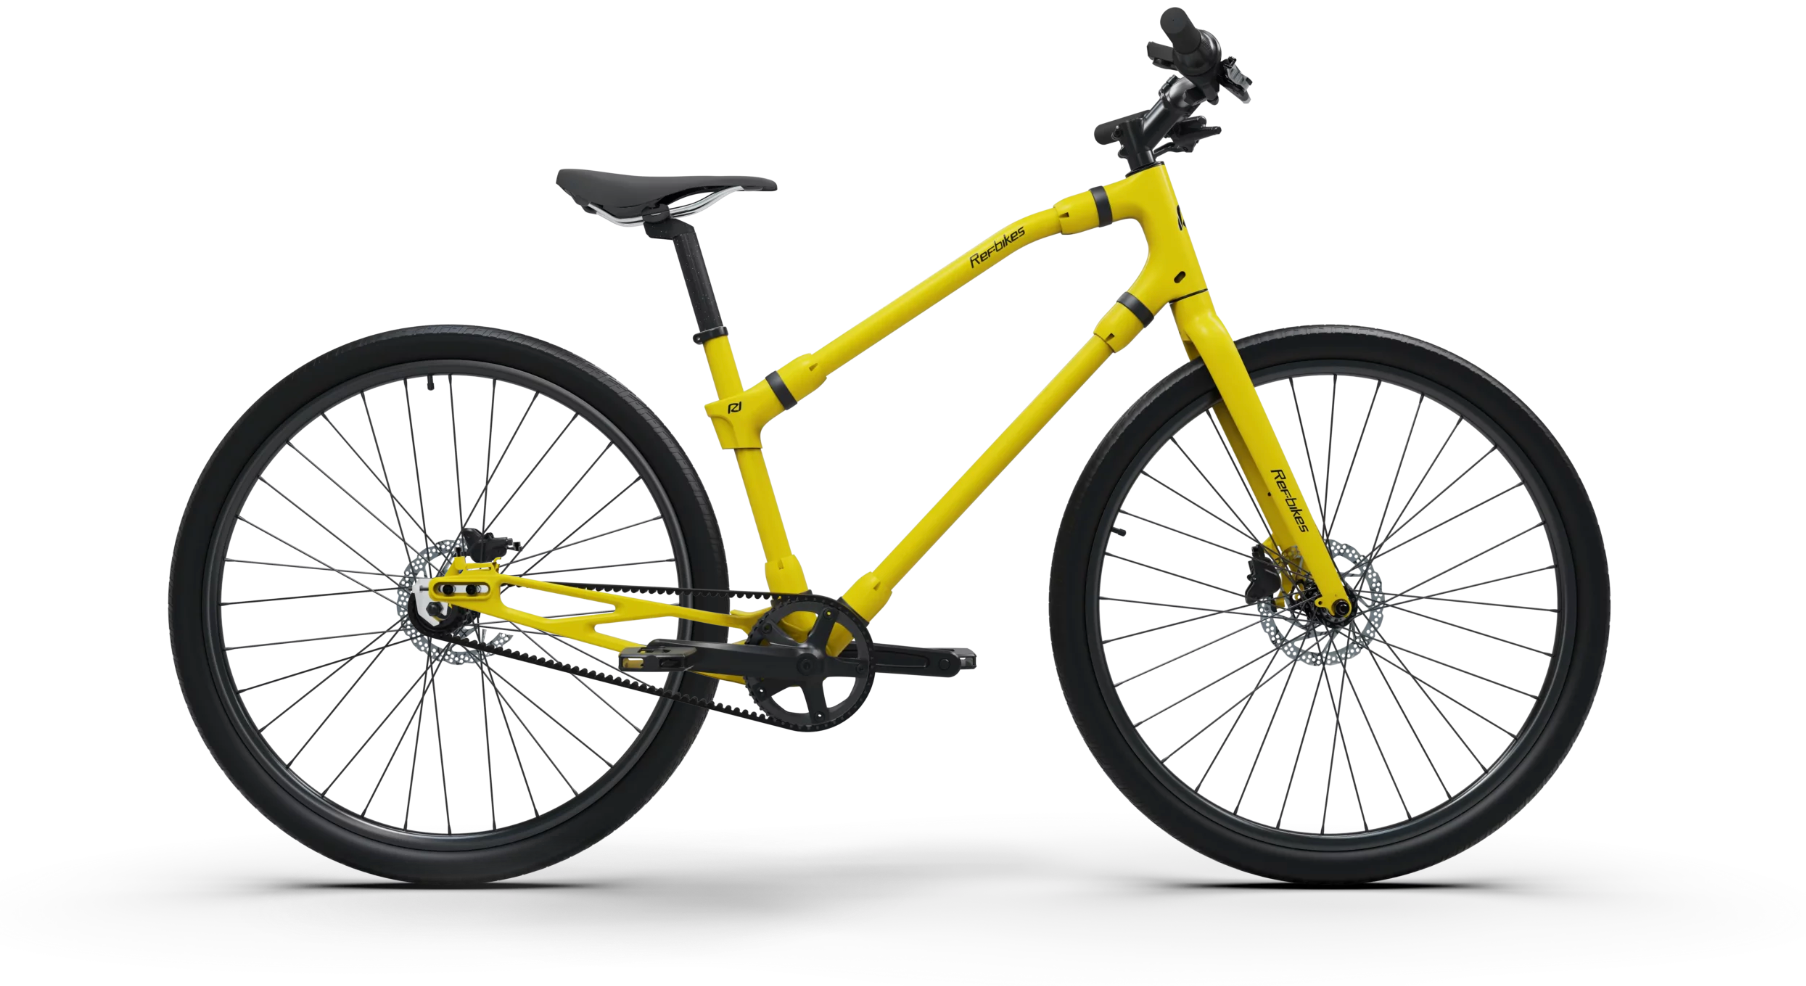 Bright yellow Ref Essential, a vibrant and eco-friendly choice for environmentally conscious commuting.